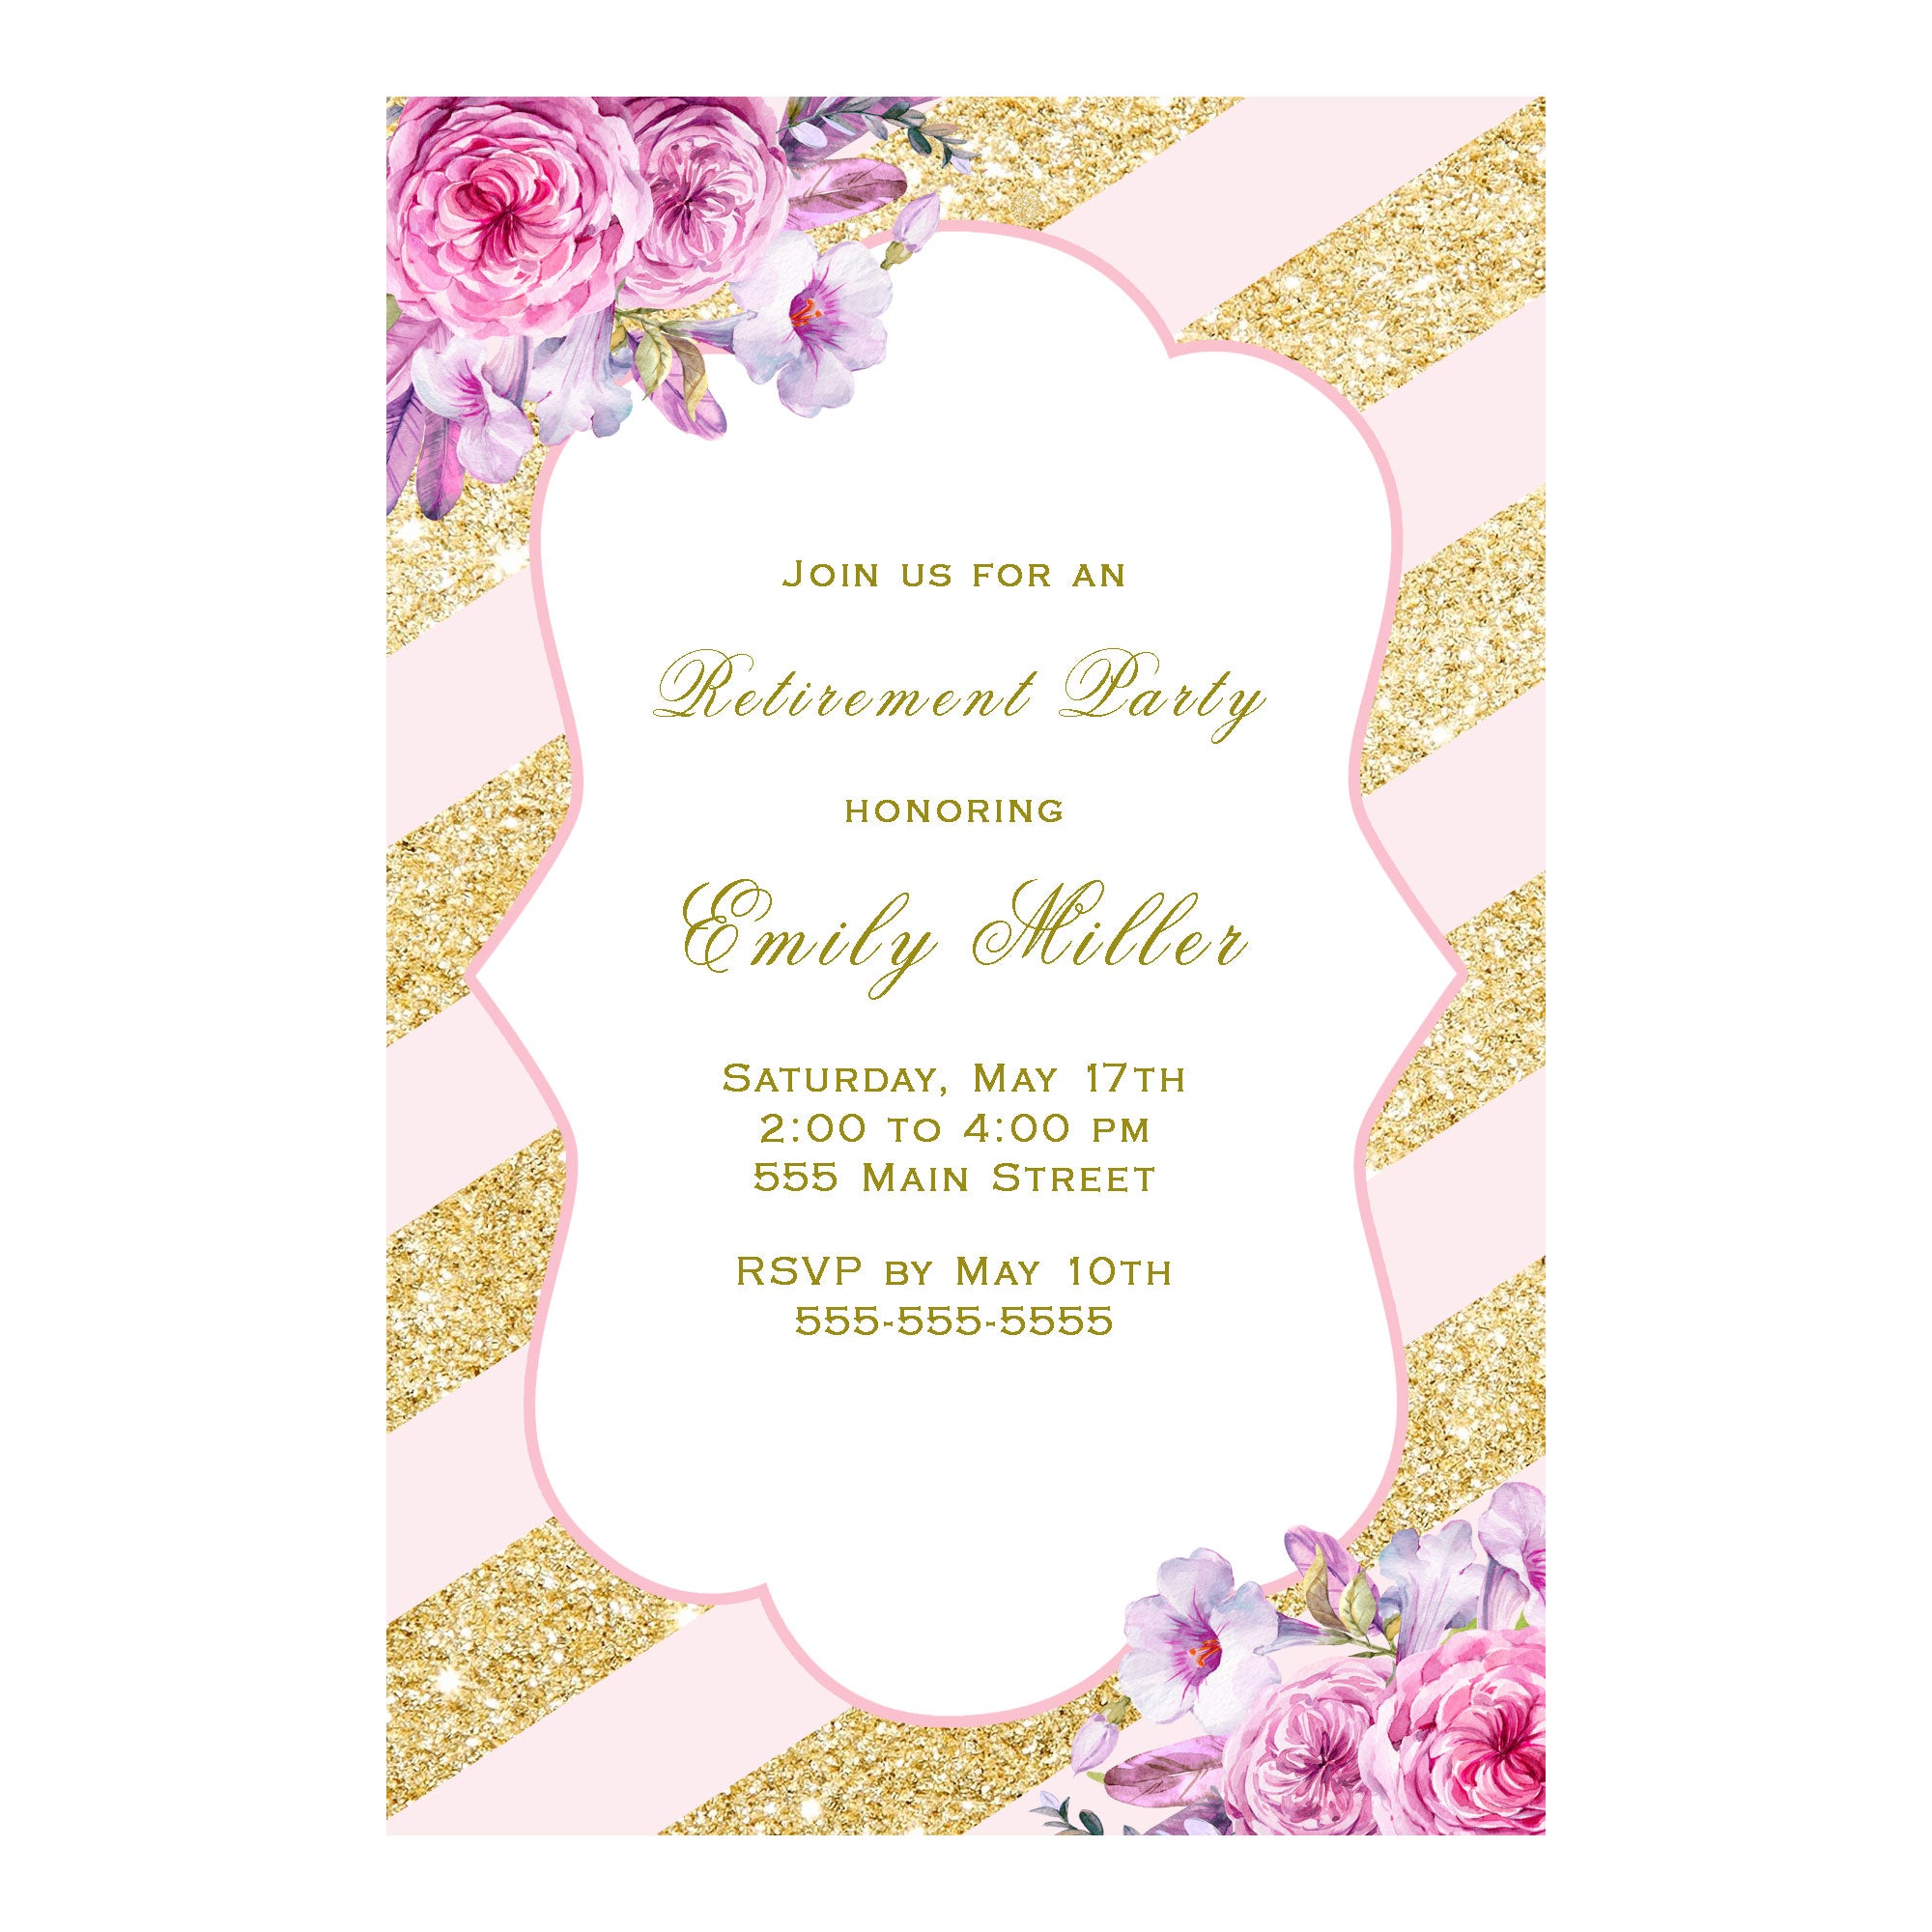 Retirement Party Invitation Blush Pink Gold Floral Printable